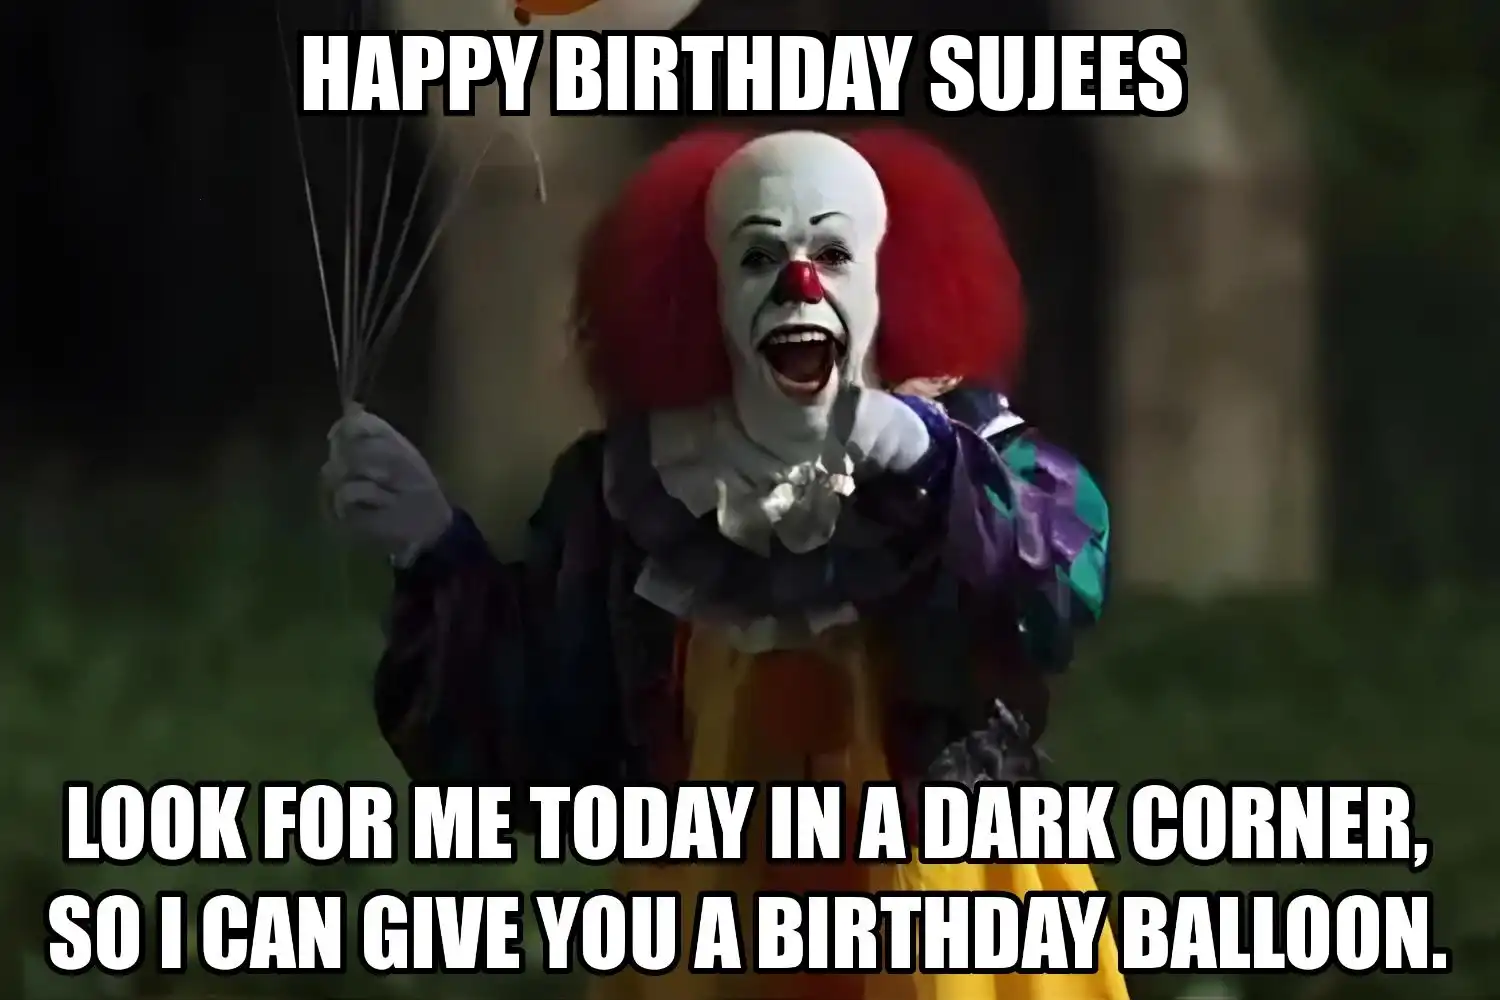 Happy Birthday Sujees I Can Give You A Balloon Meme